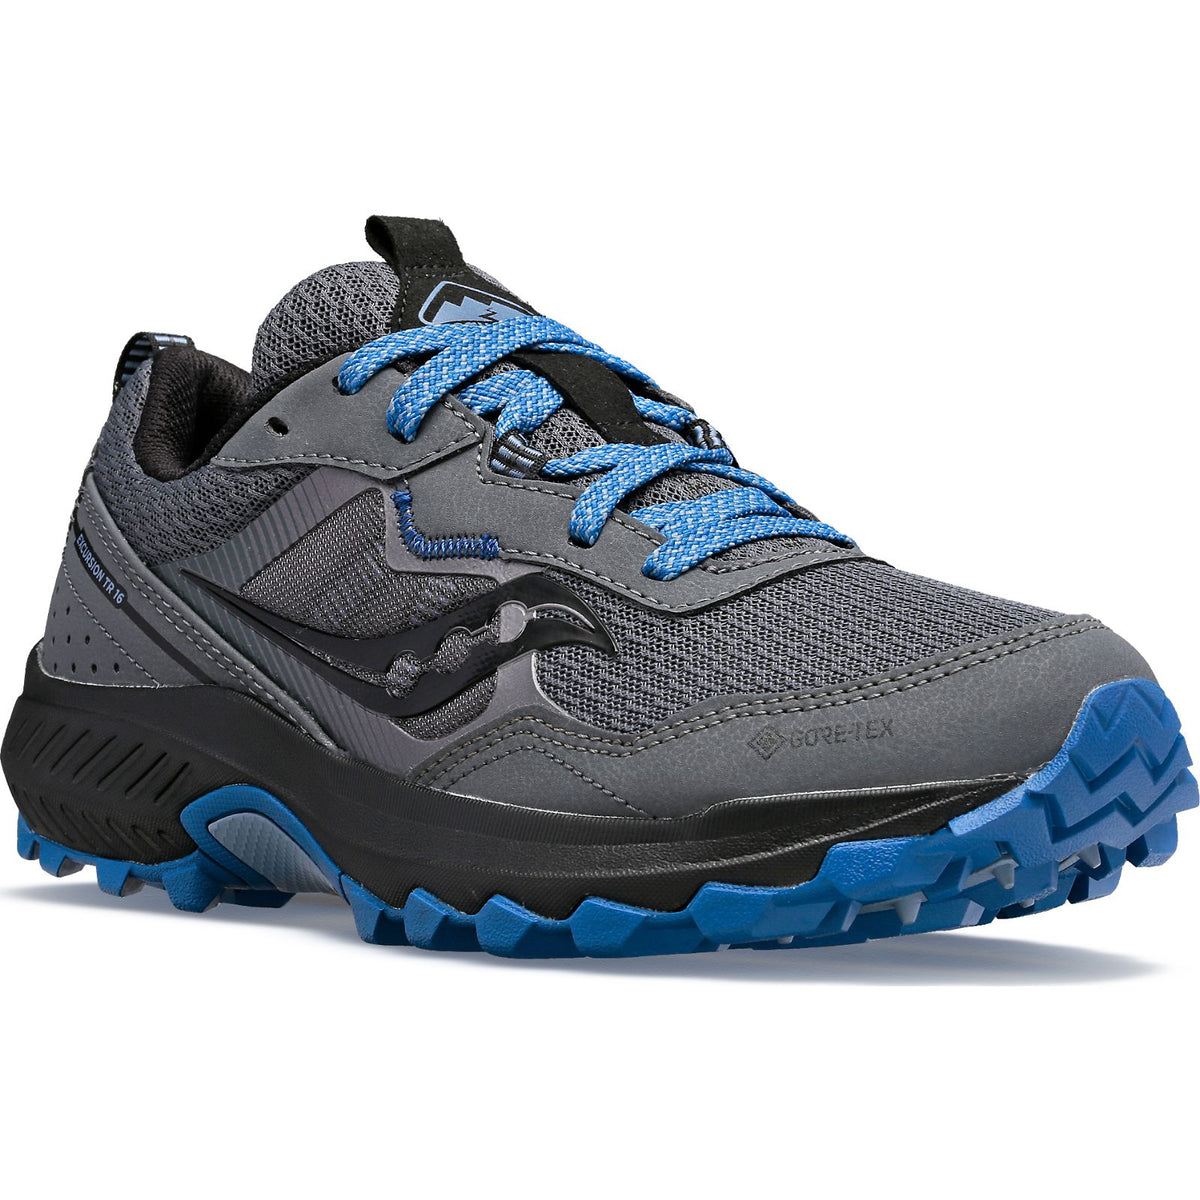 Excursion TR16 GTX | Saucony | Playmakers